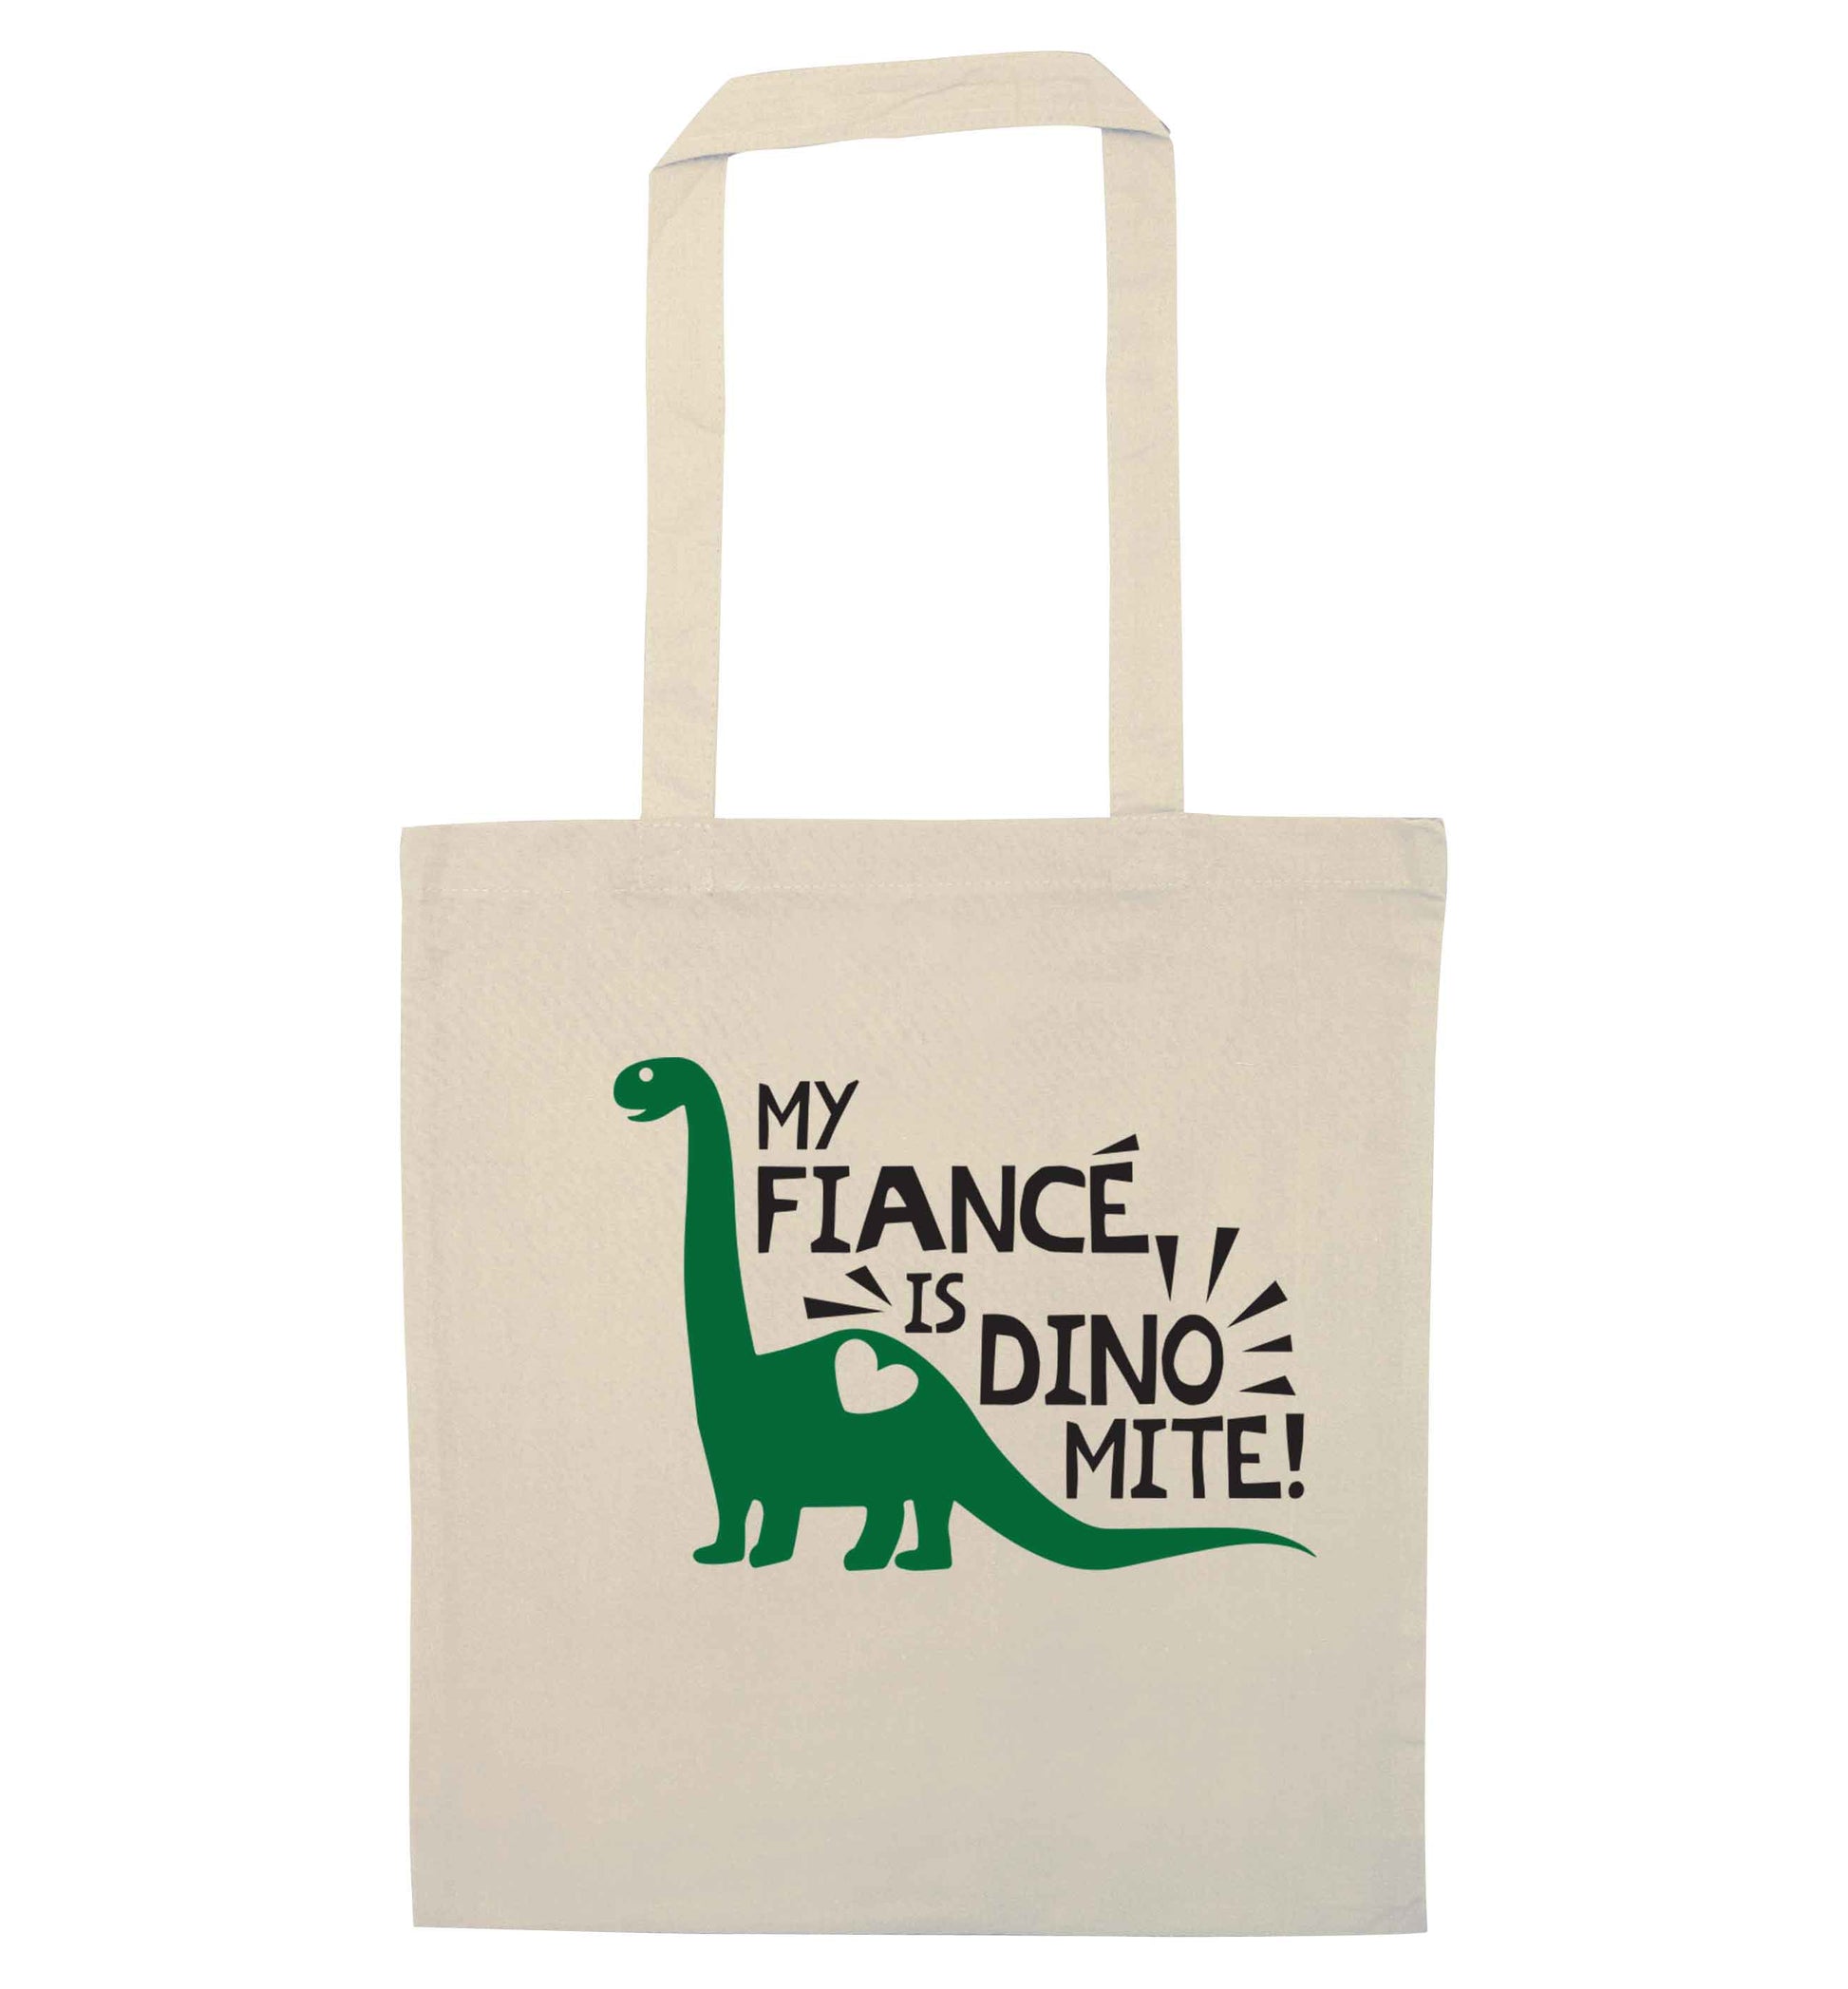 My fiance is dinomite! natural tote bag